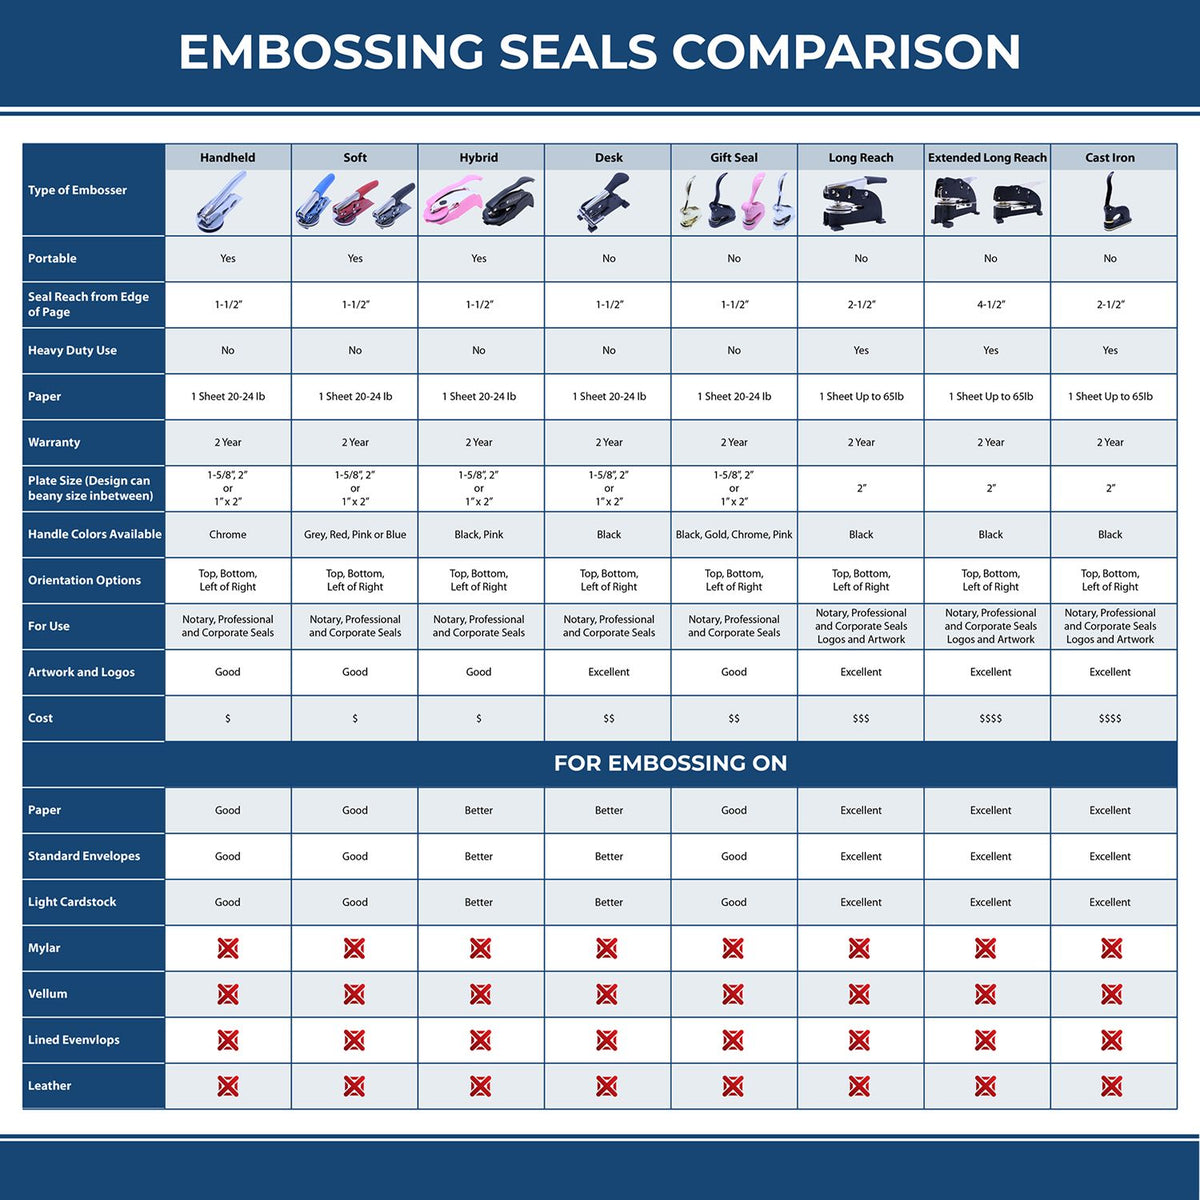 A comparison chart for the different types of mount models available for the Long Reach Tennessee PE Seal.